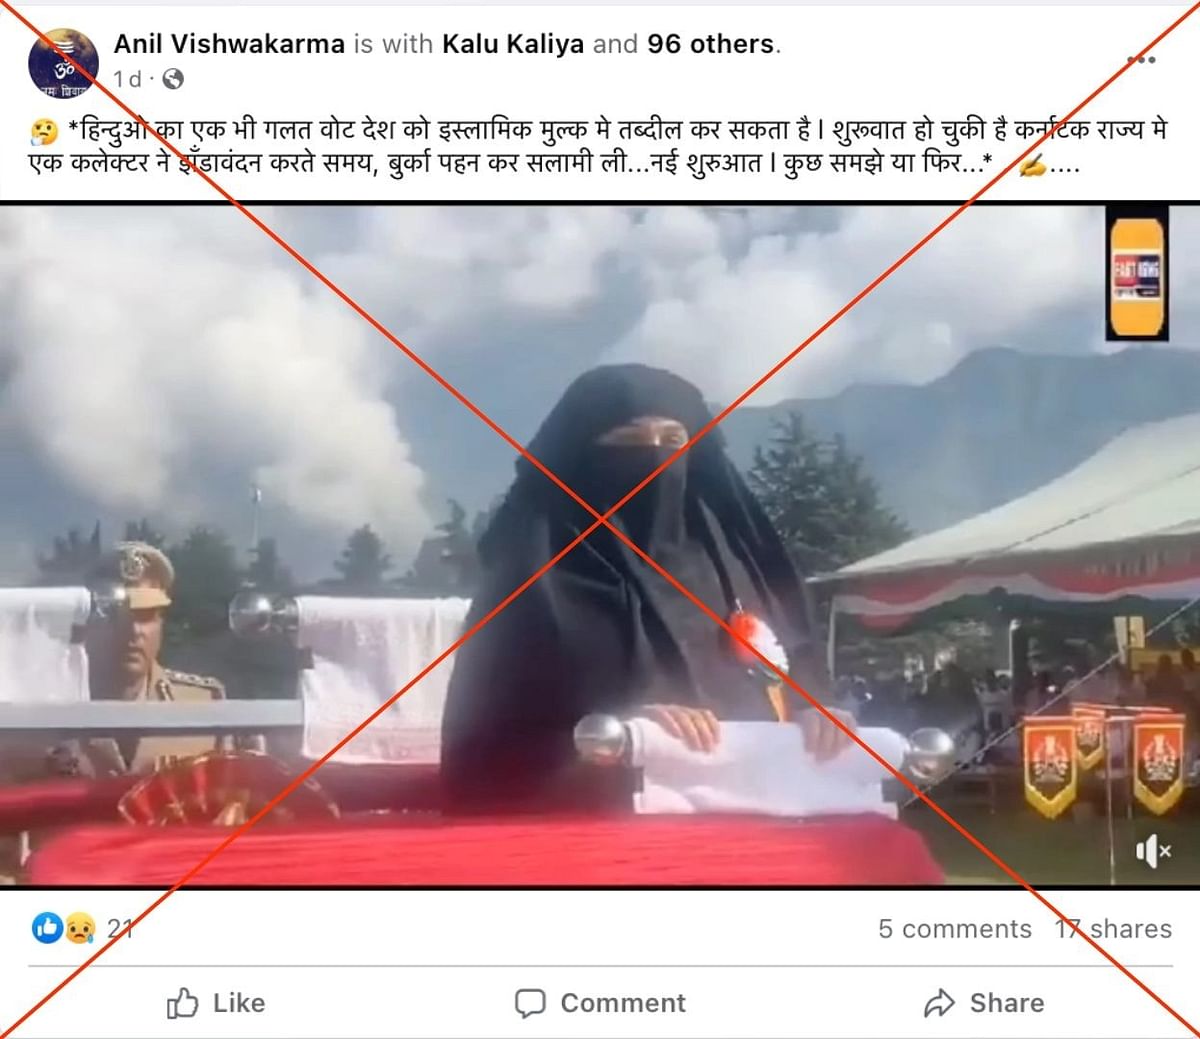 The video is from Jammu and Kashmir and shows the vice chairperson of Kishtwar's District Development Council.